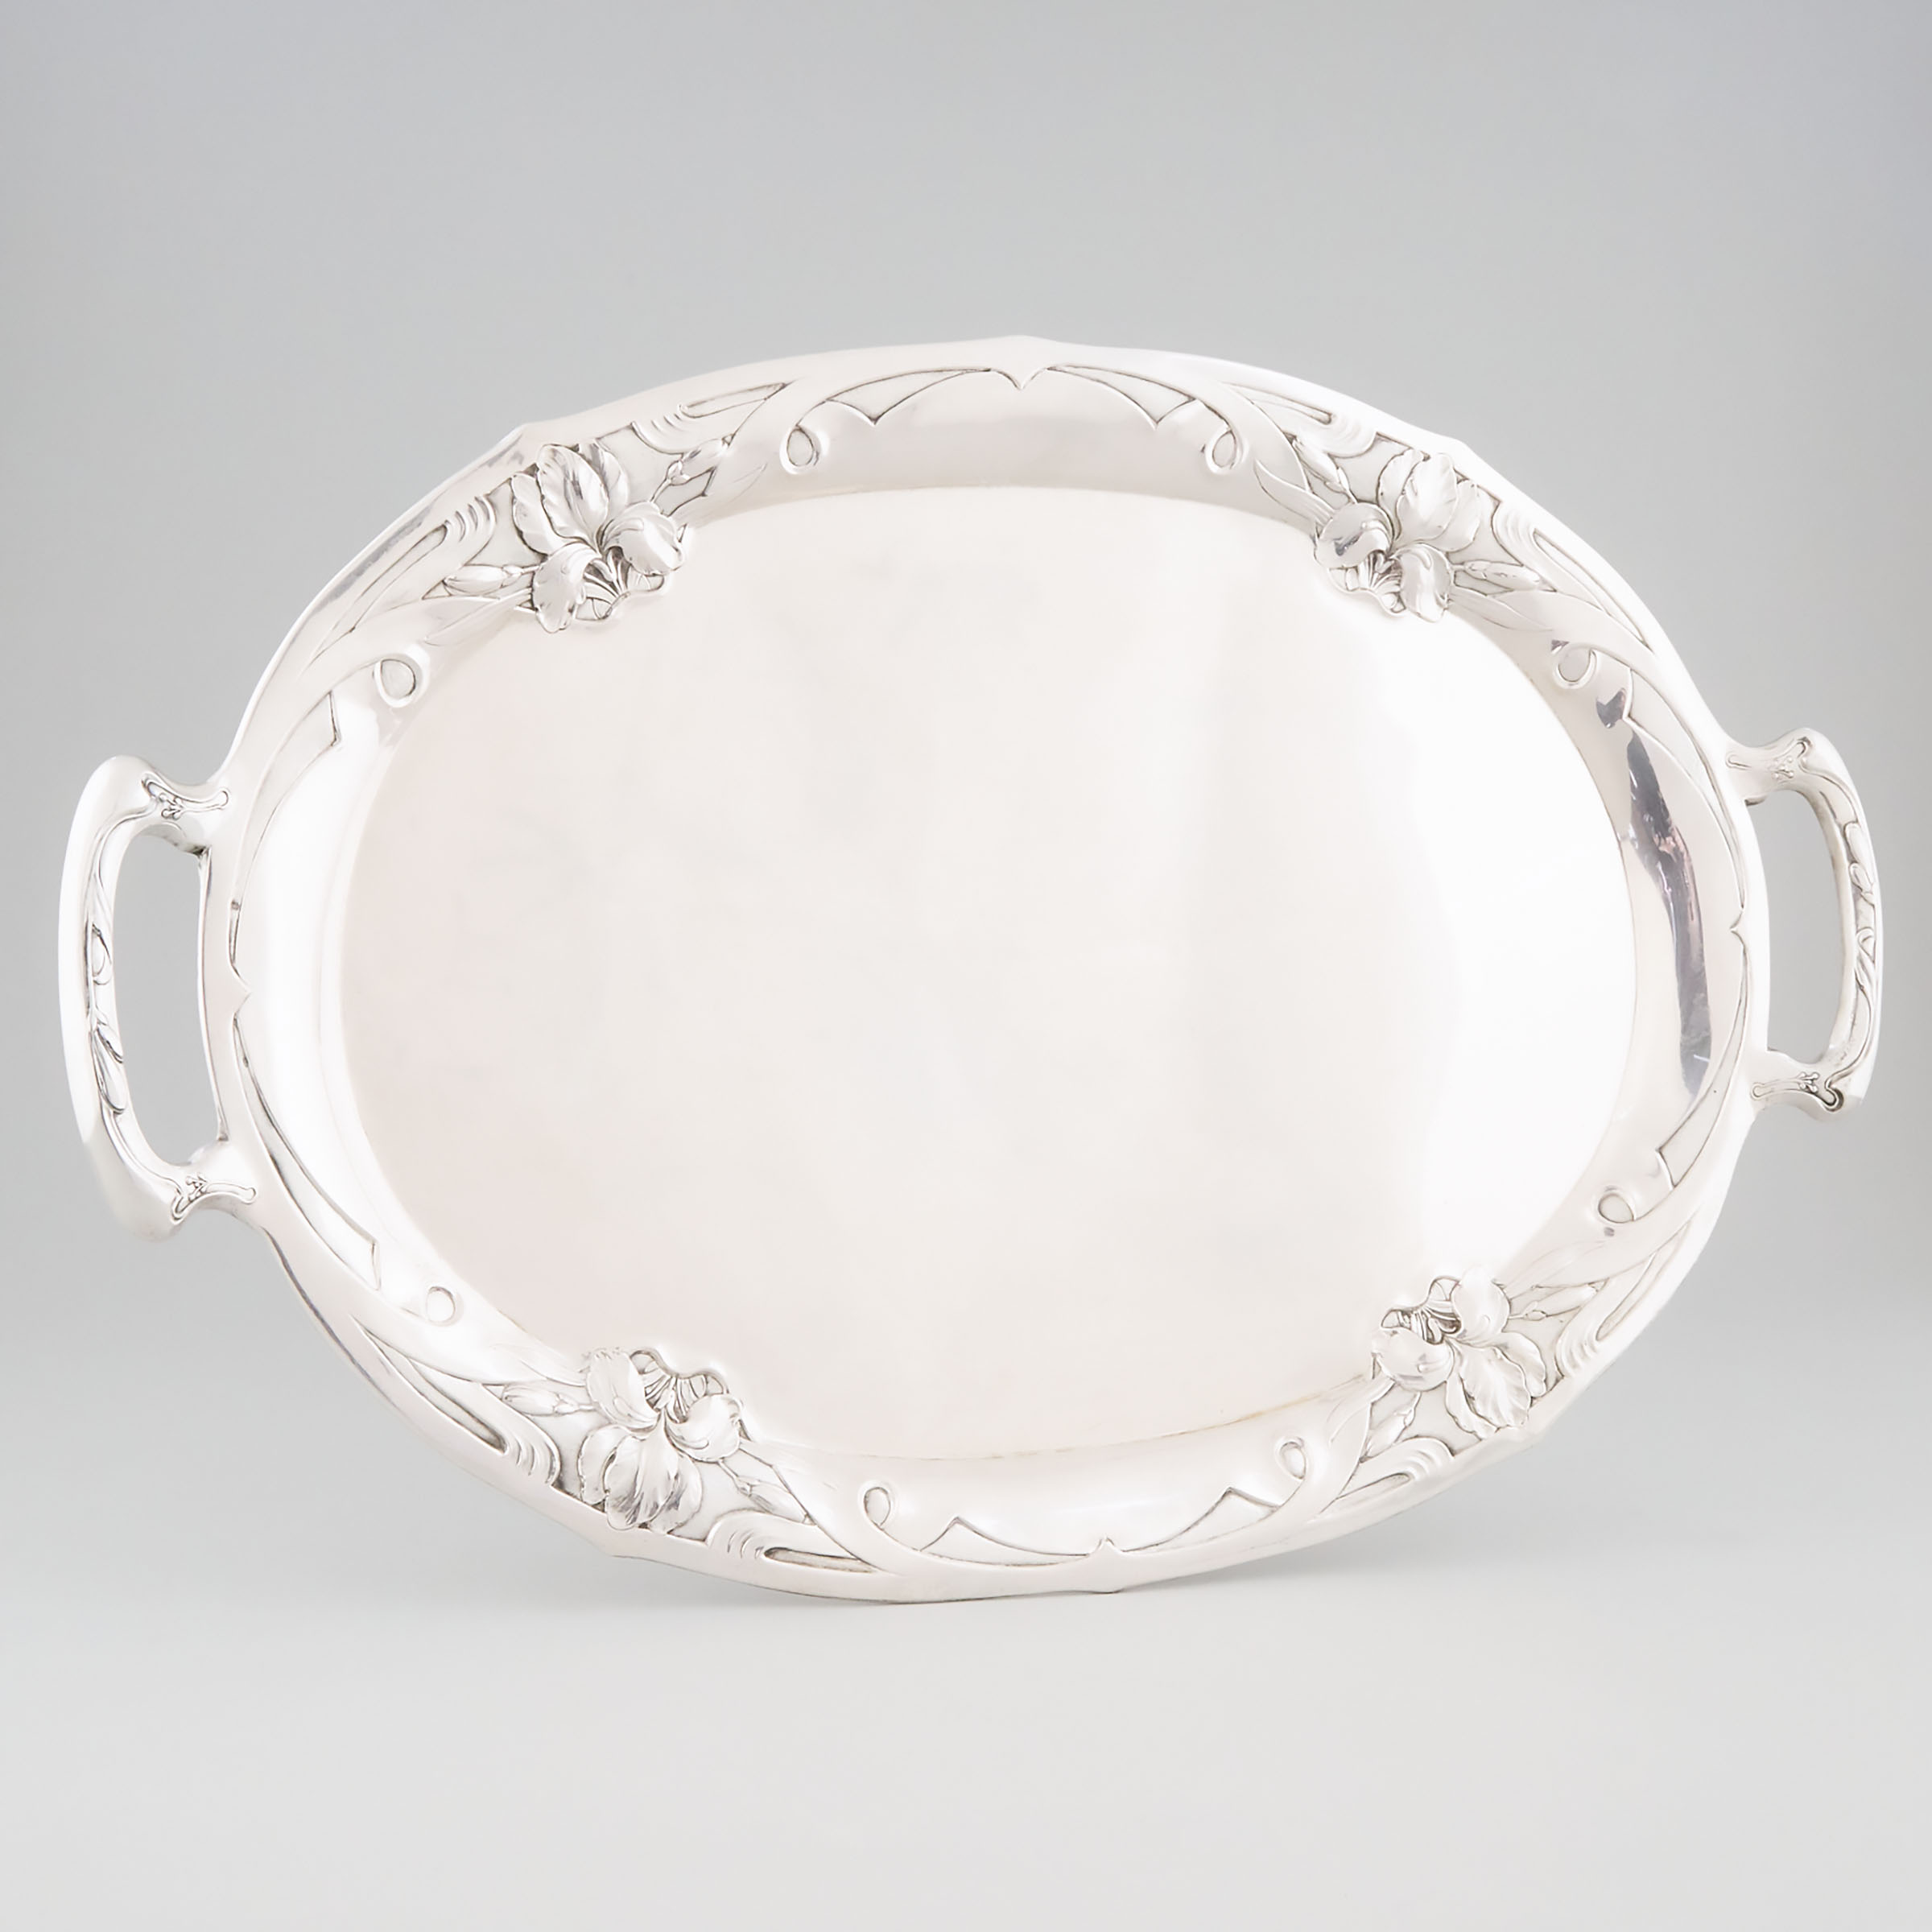 Austro-Hungarian Art Nouveau Silver Two-Handled Oval Serving Tray, Vienna, c.1900